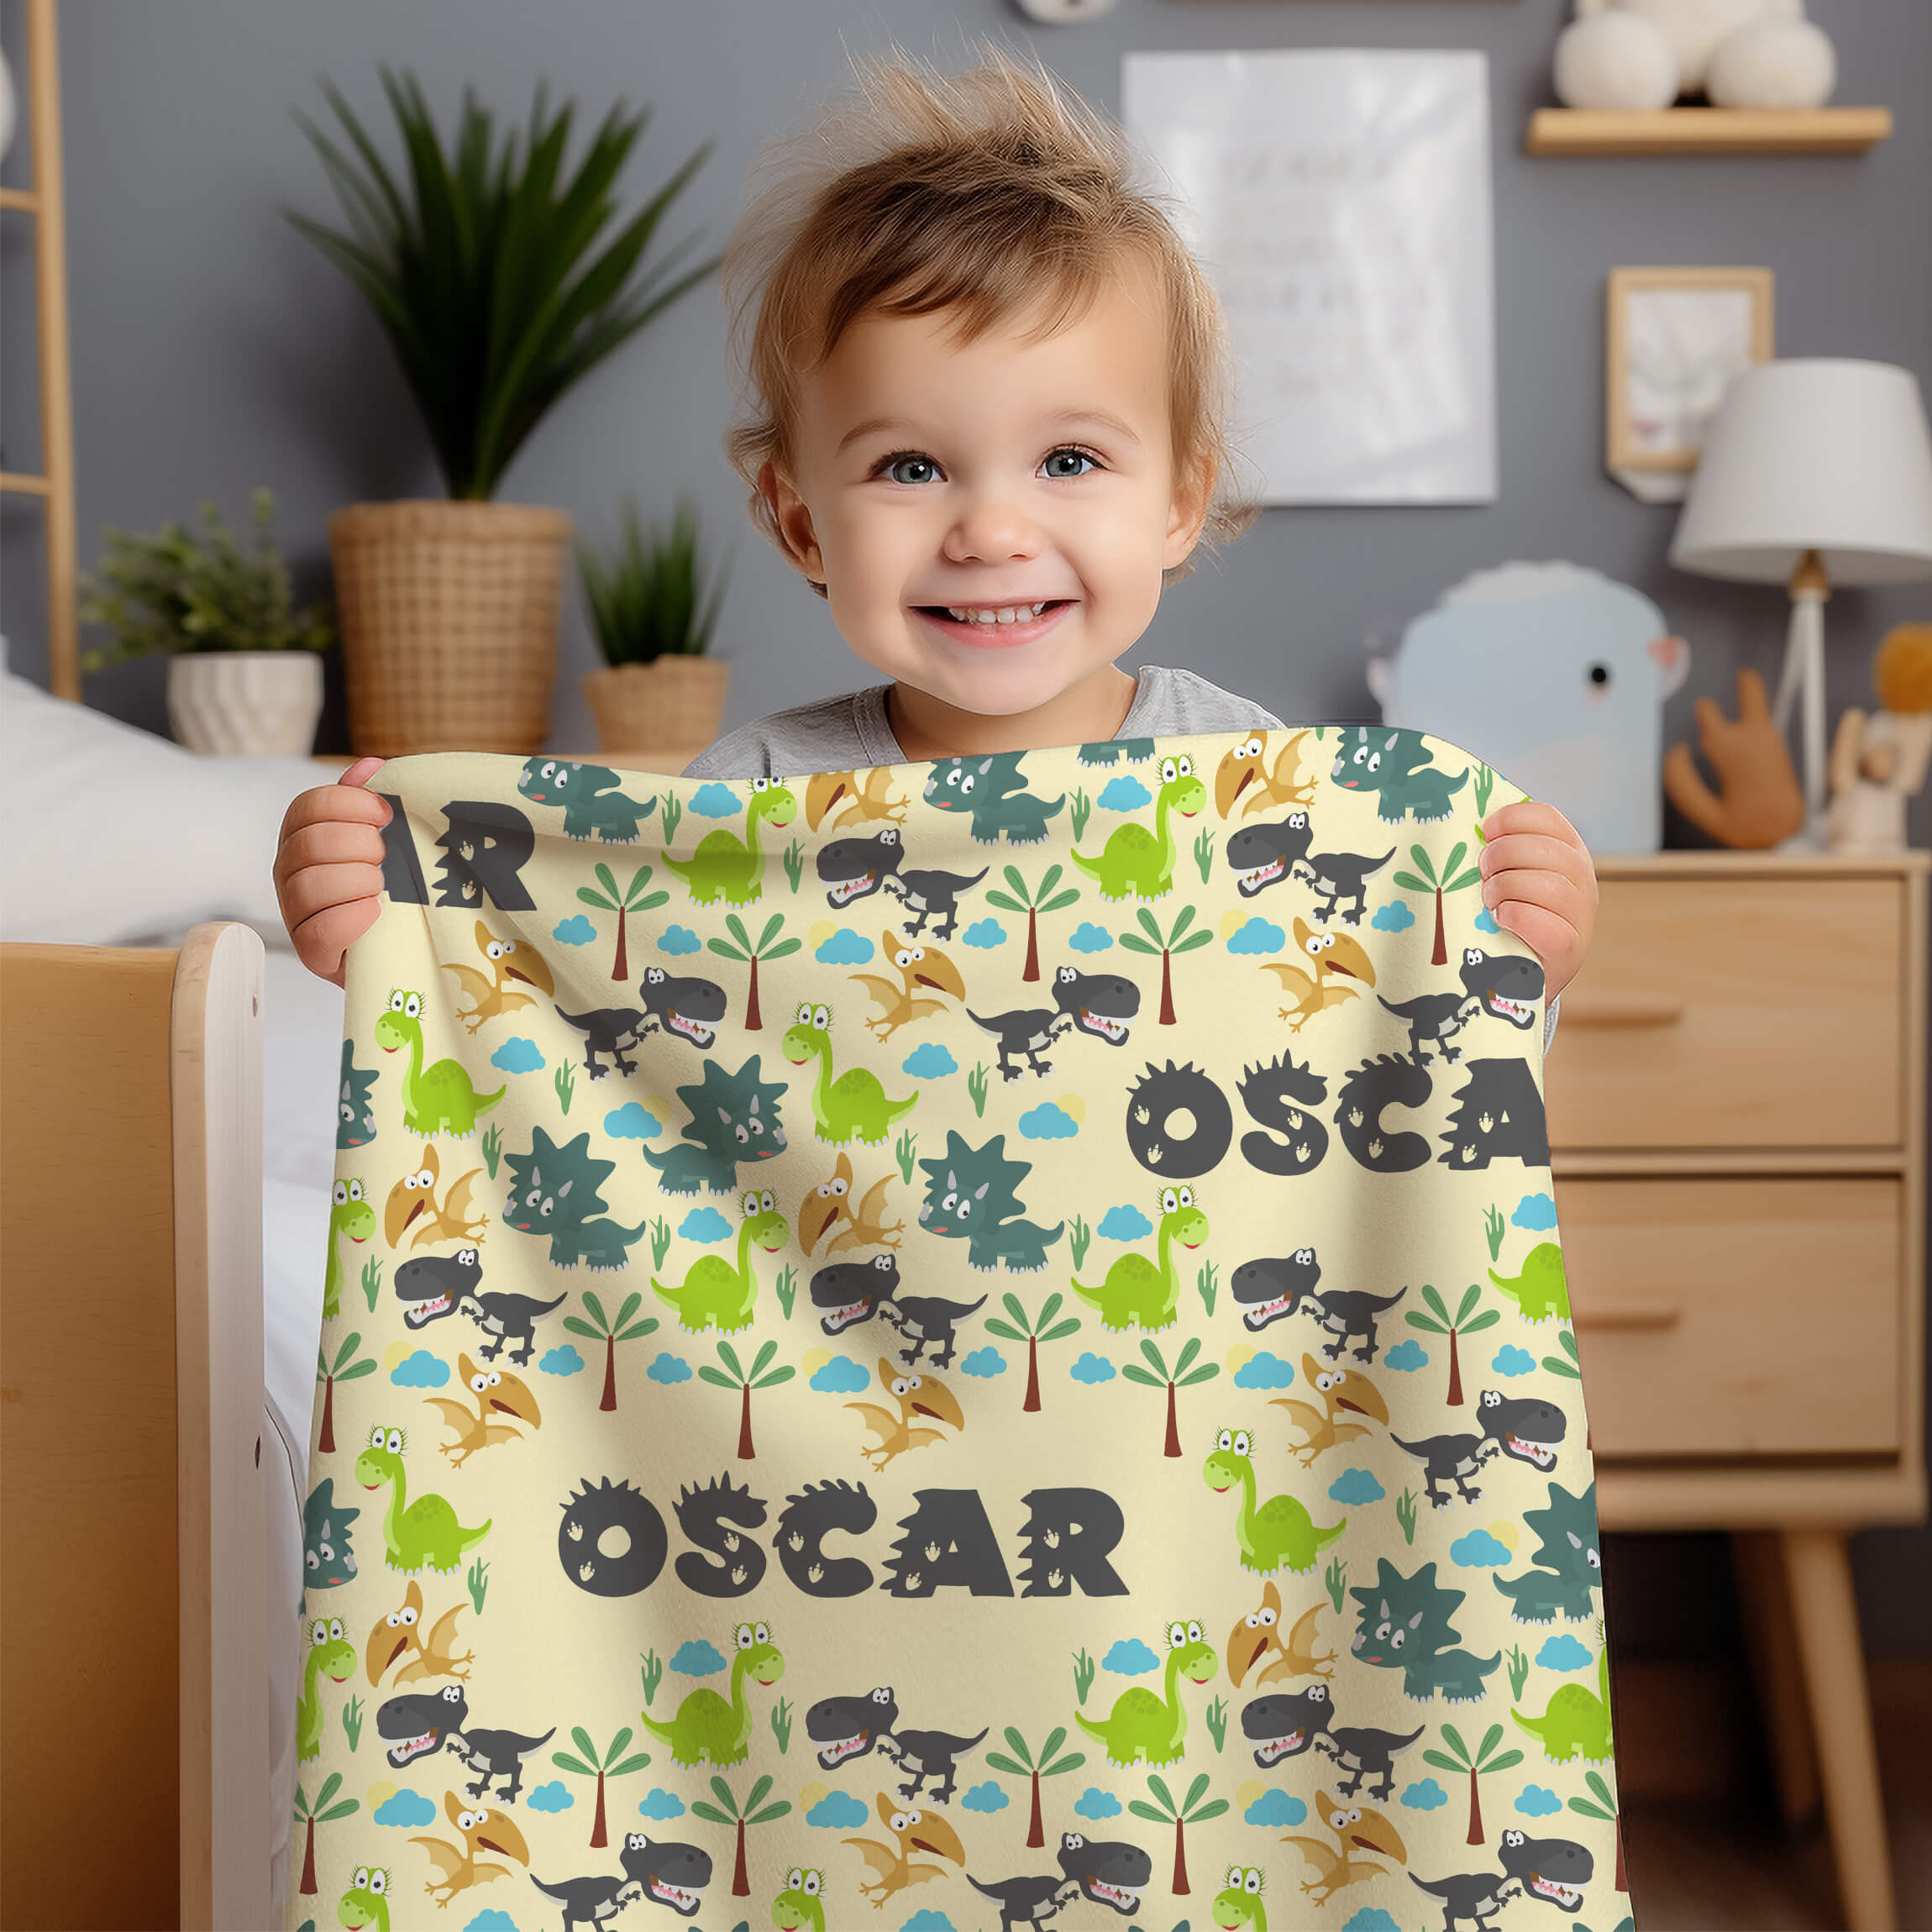 Personalized Name Blanket - Little Dino